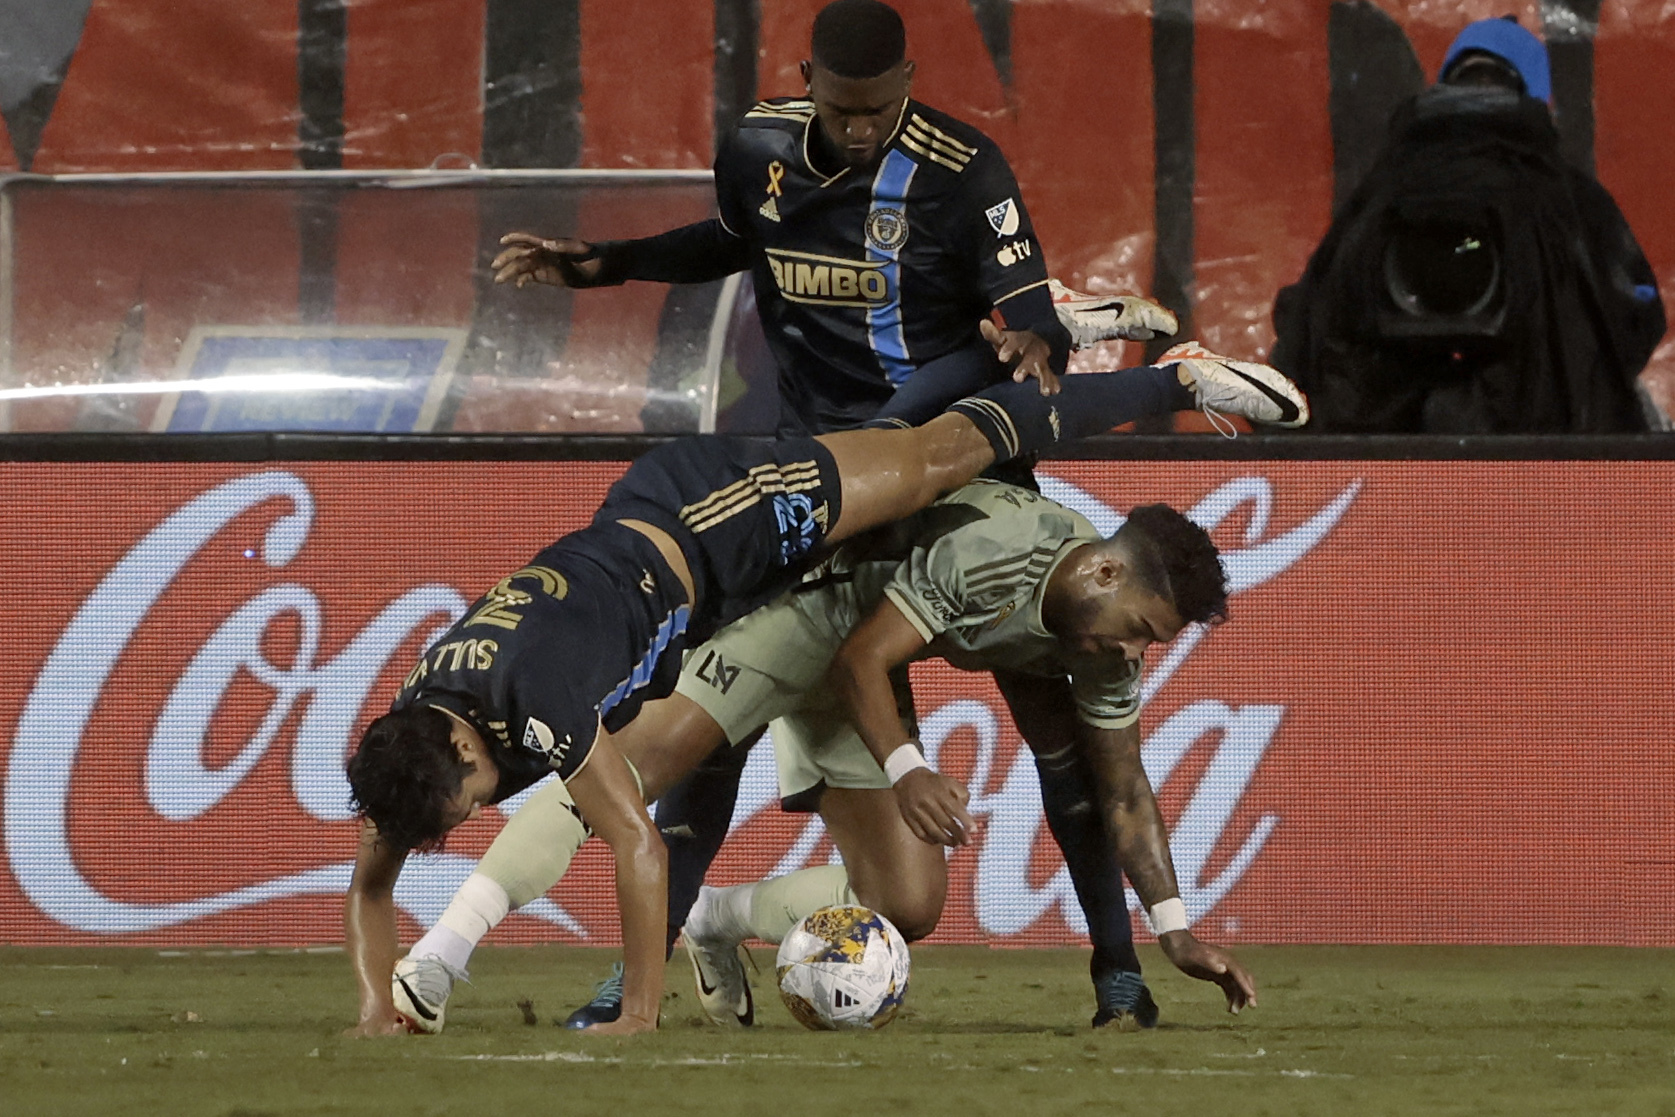 Union head to LAFC as underdog in 2nd leg of Champions League